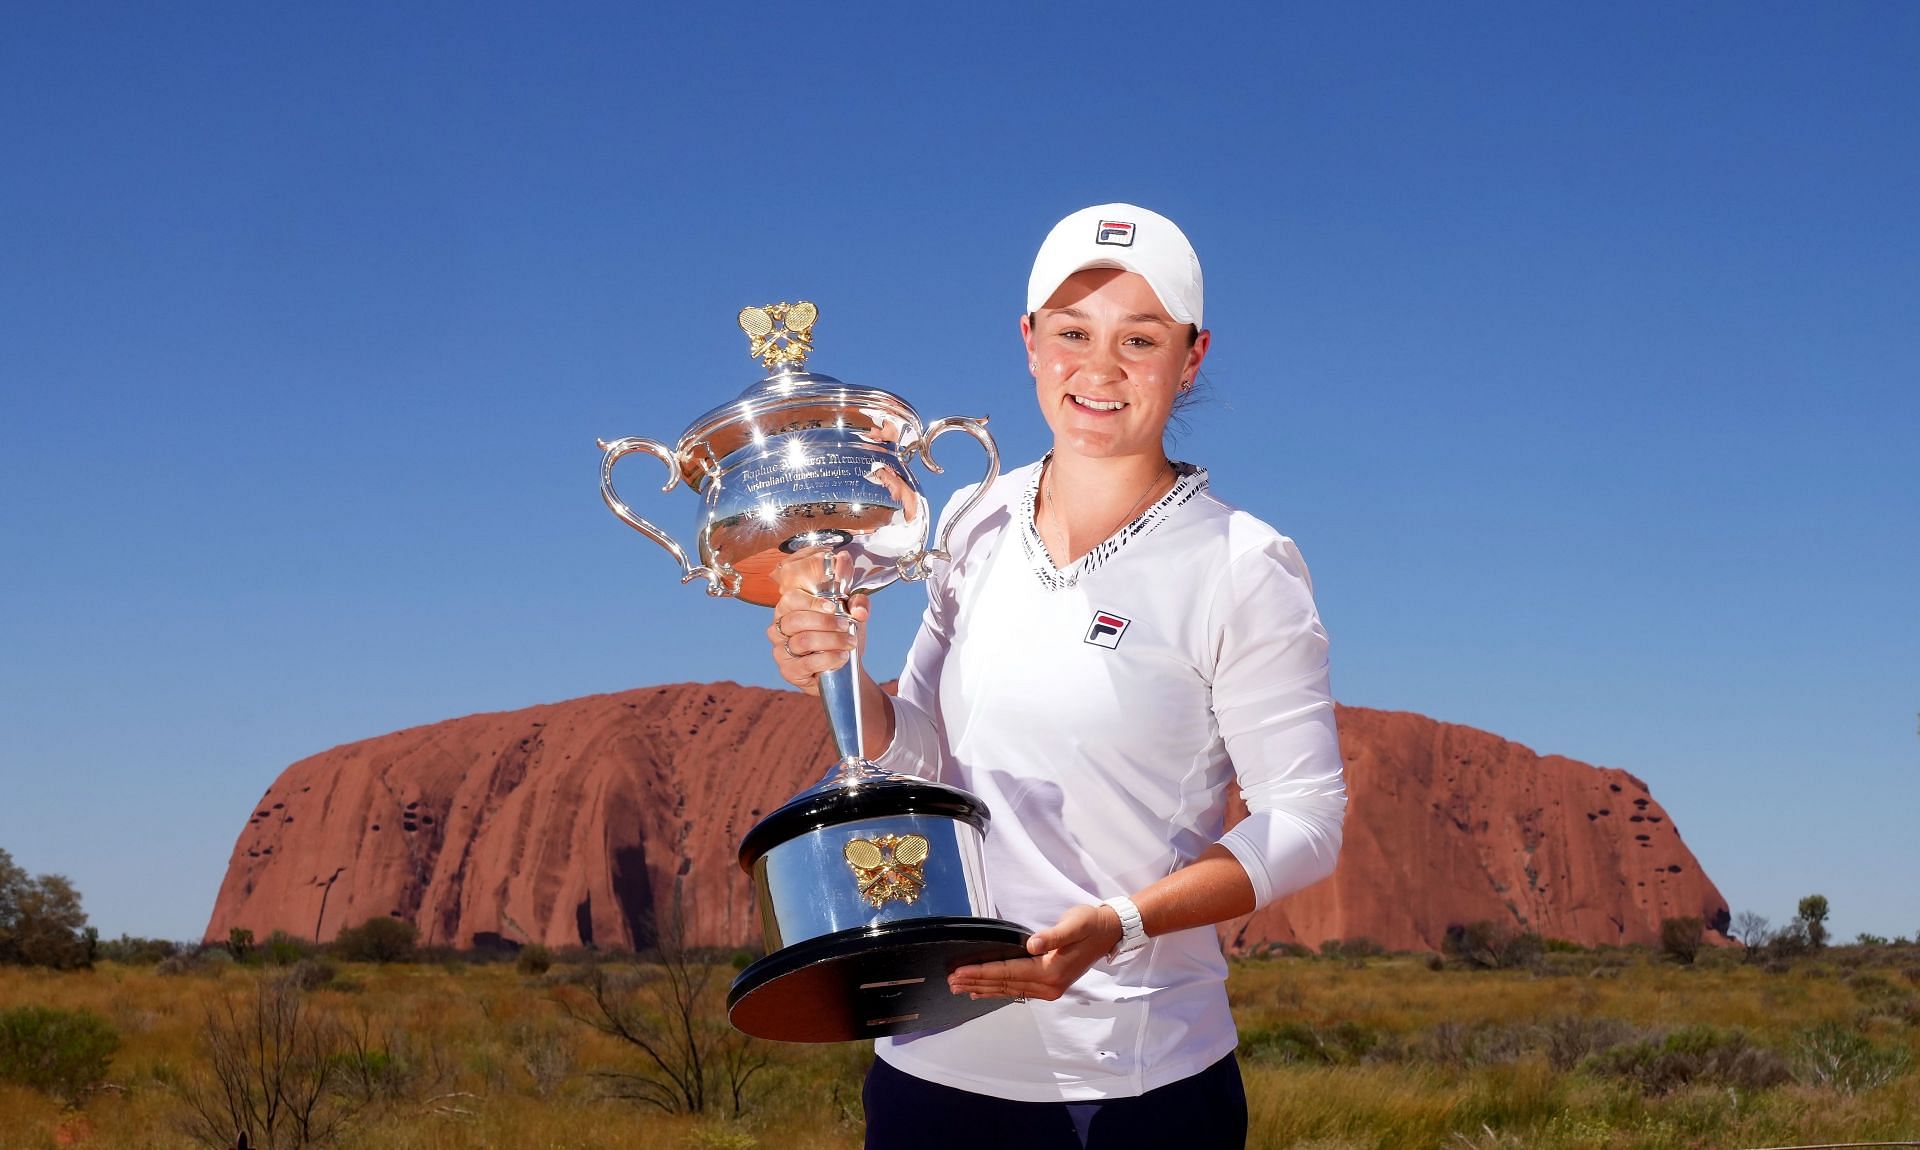 Ashleigh Barty poses with the Daphne Akhurst Memorial Cup as she visits Uluru in the Uluru-Kata Tjuta National Park